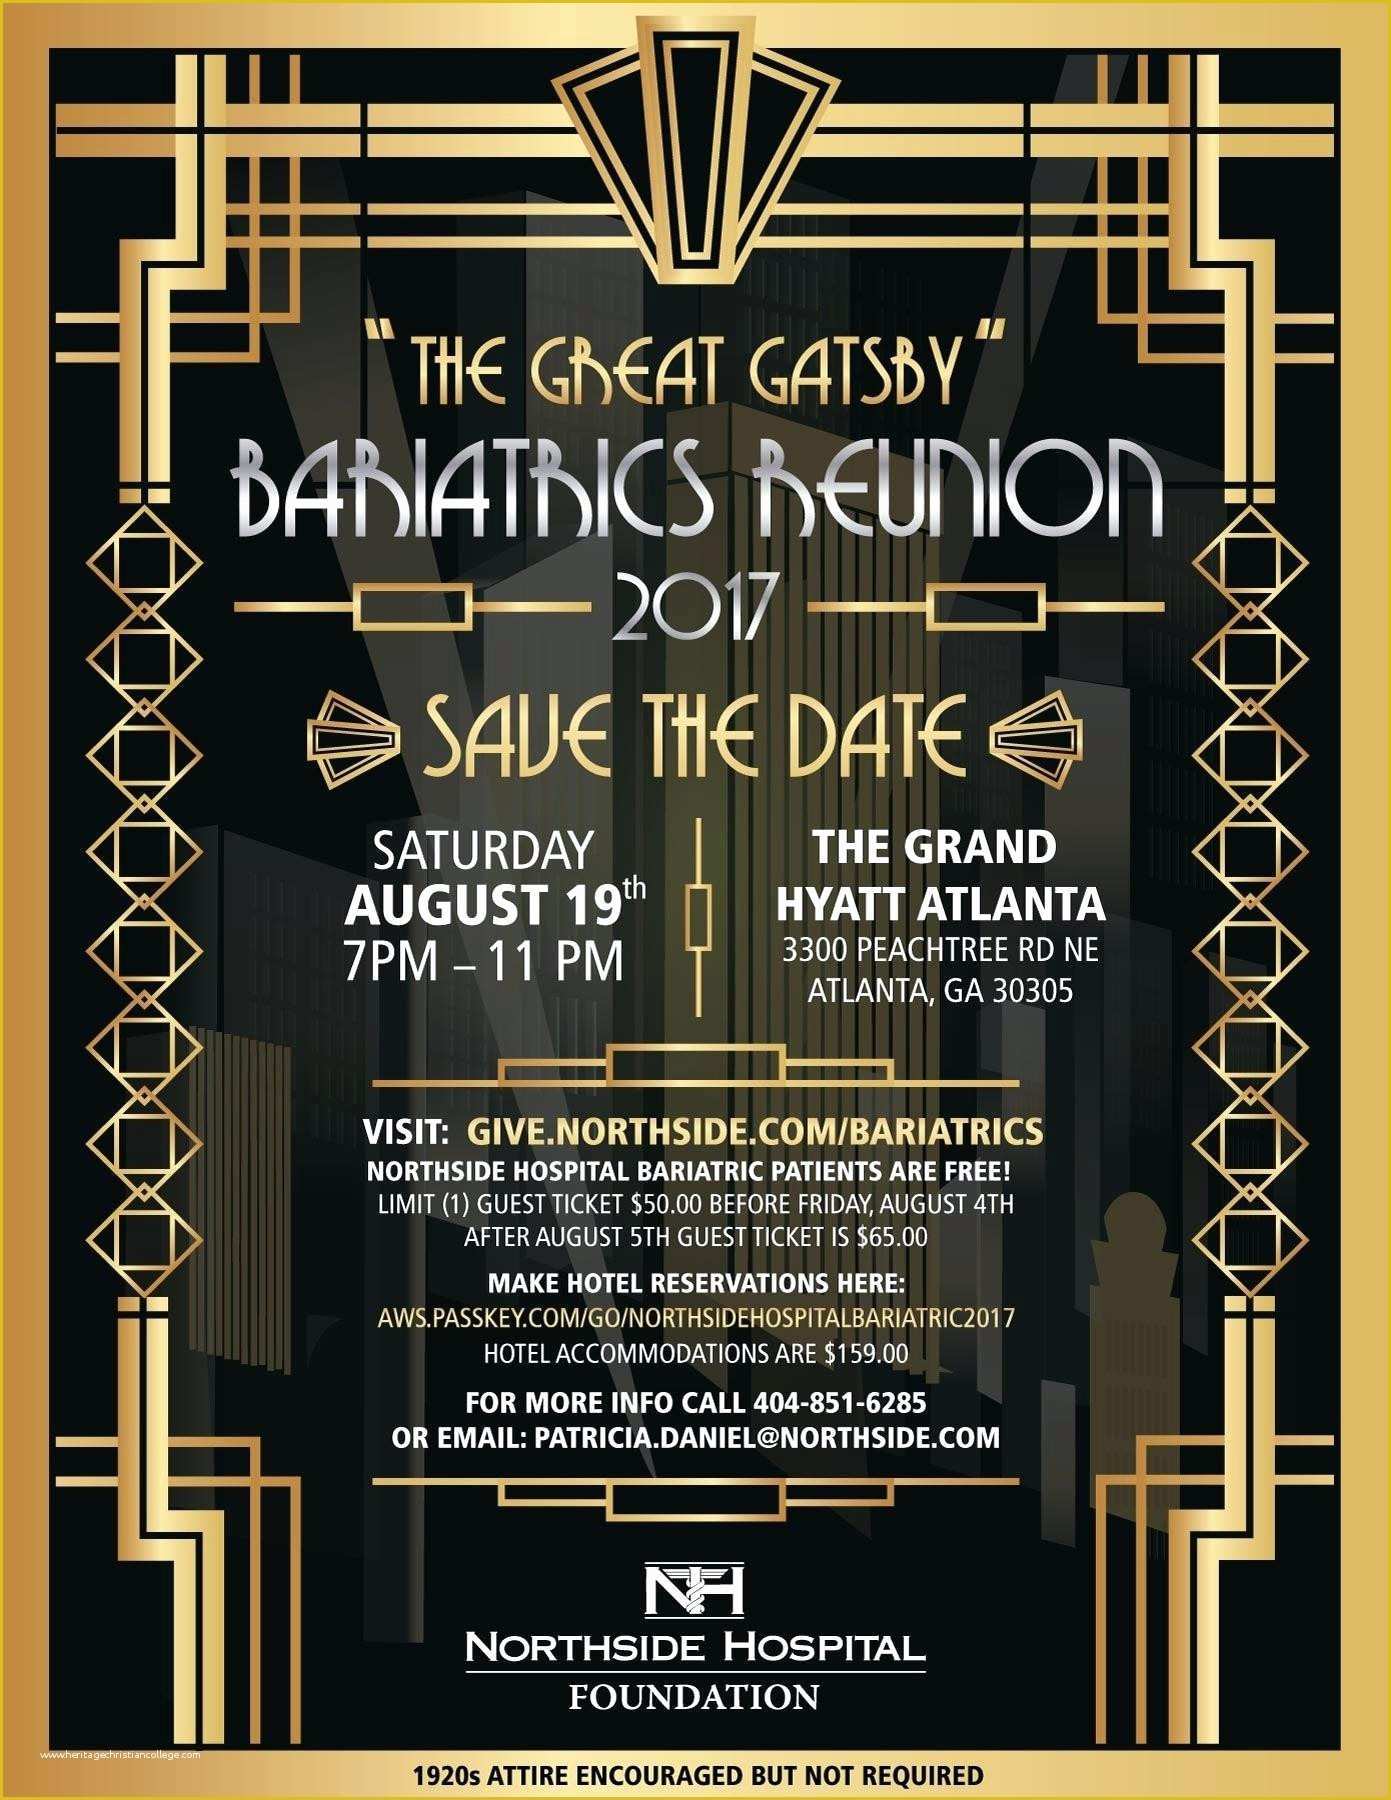 Great Gatsby Invitation Template Free Download Of the Great Gatsby Invitation Template Free Downloads Nice